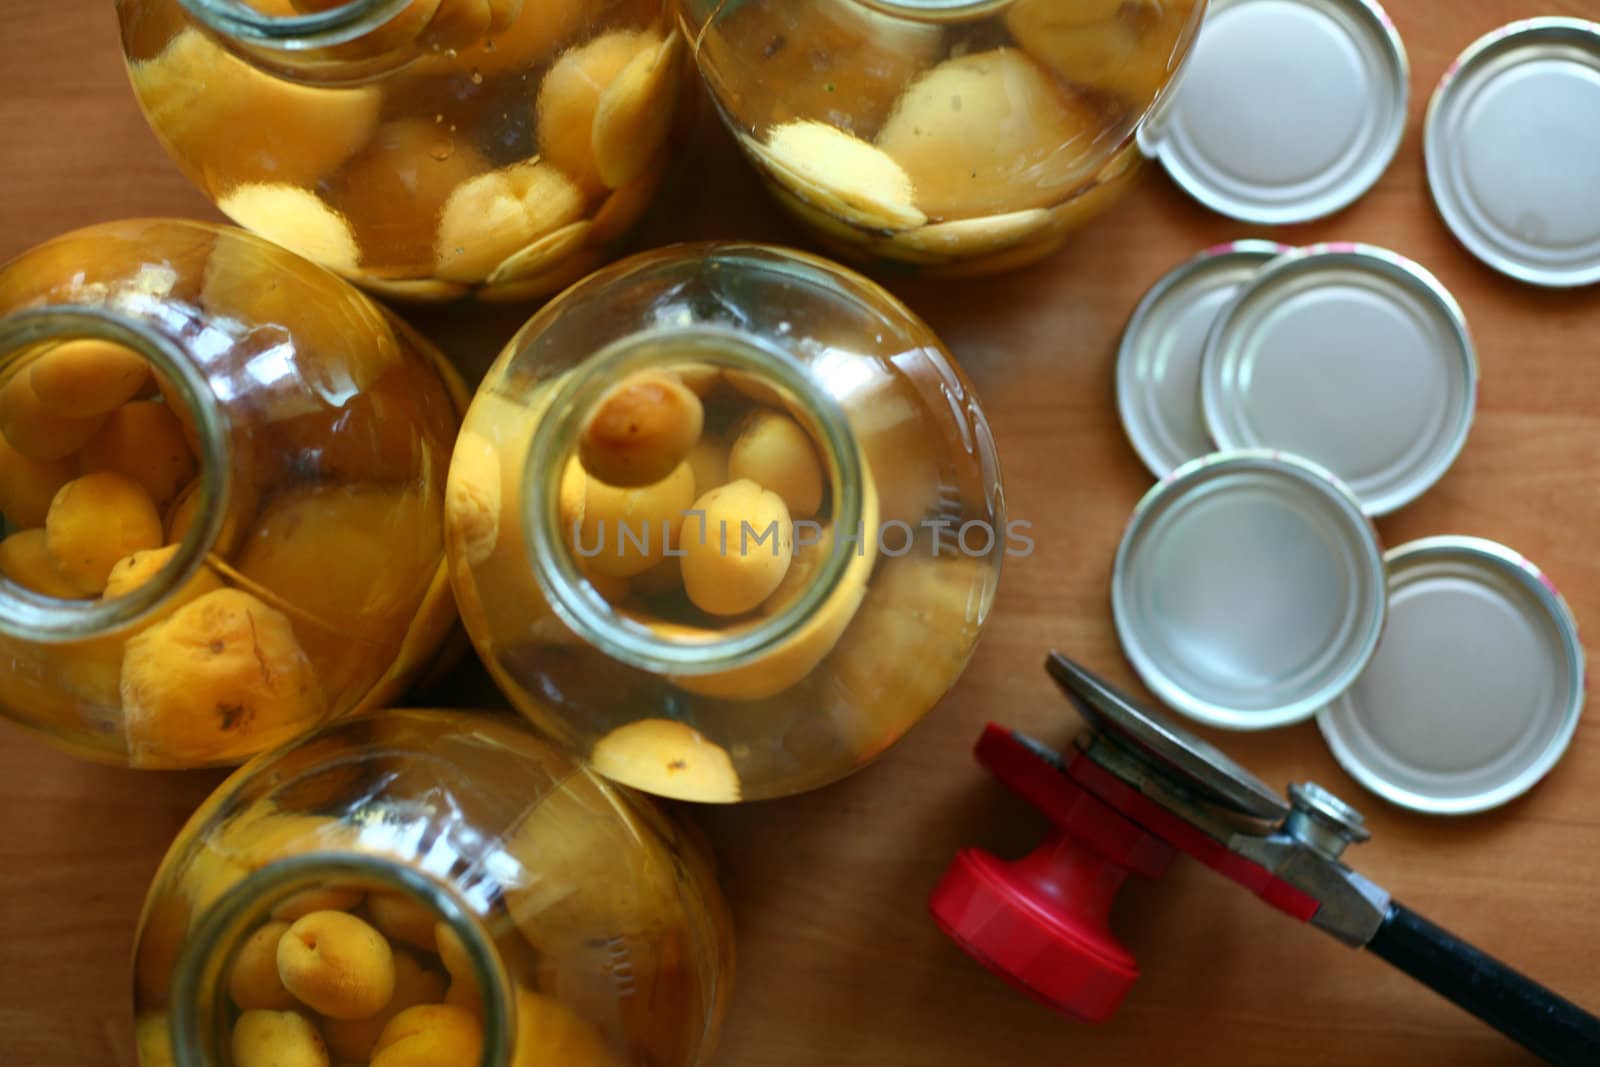 An image of a jar of sweet apricot compote